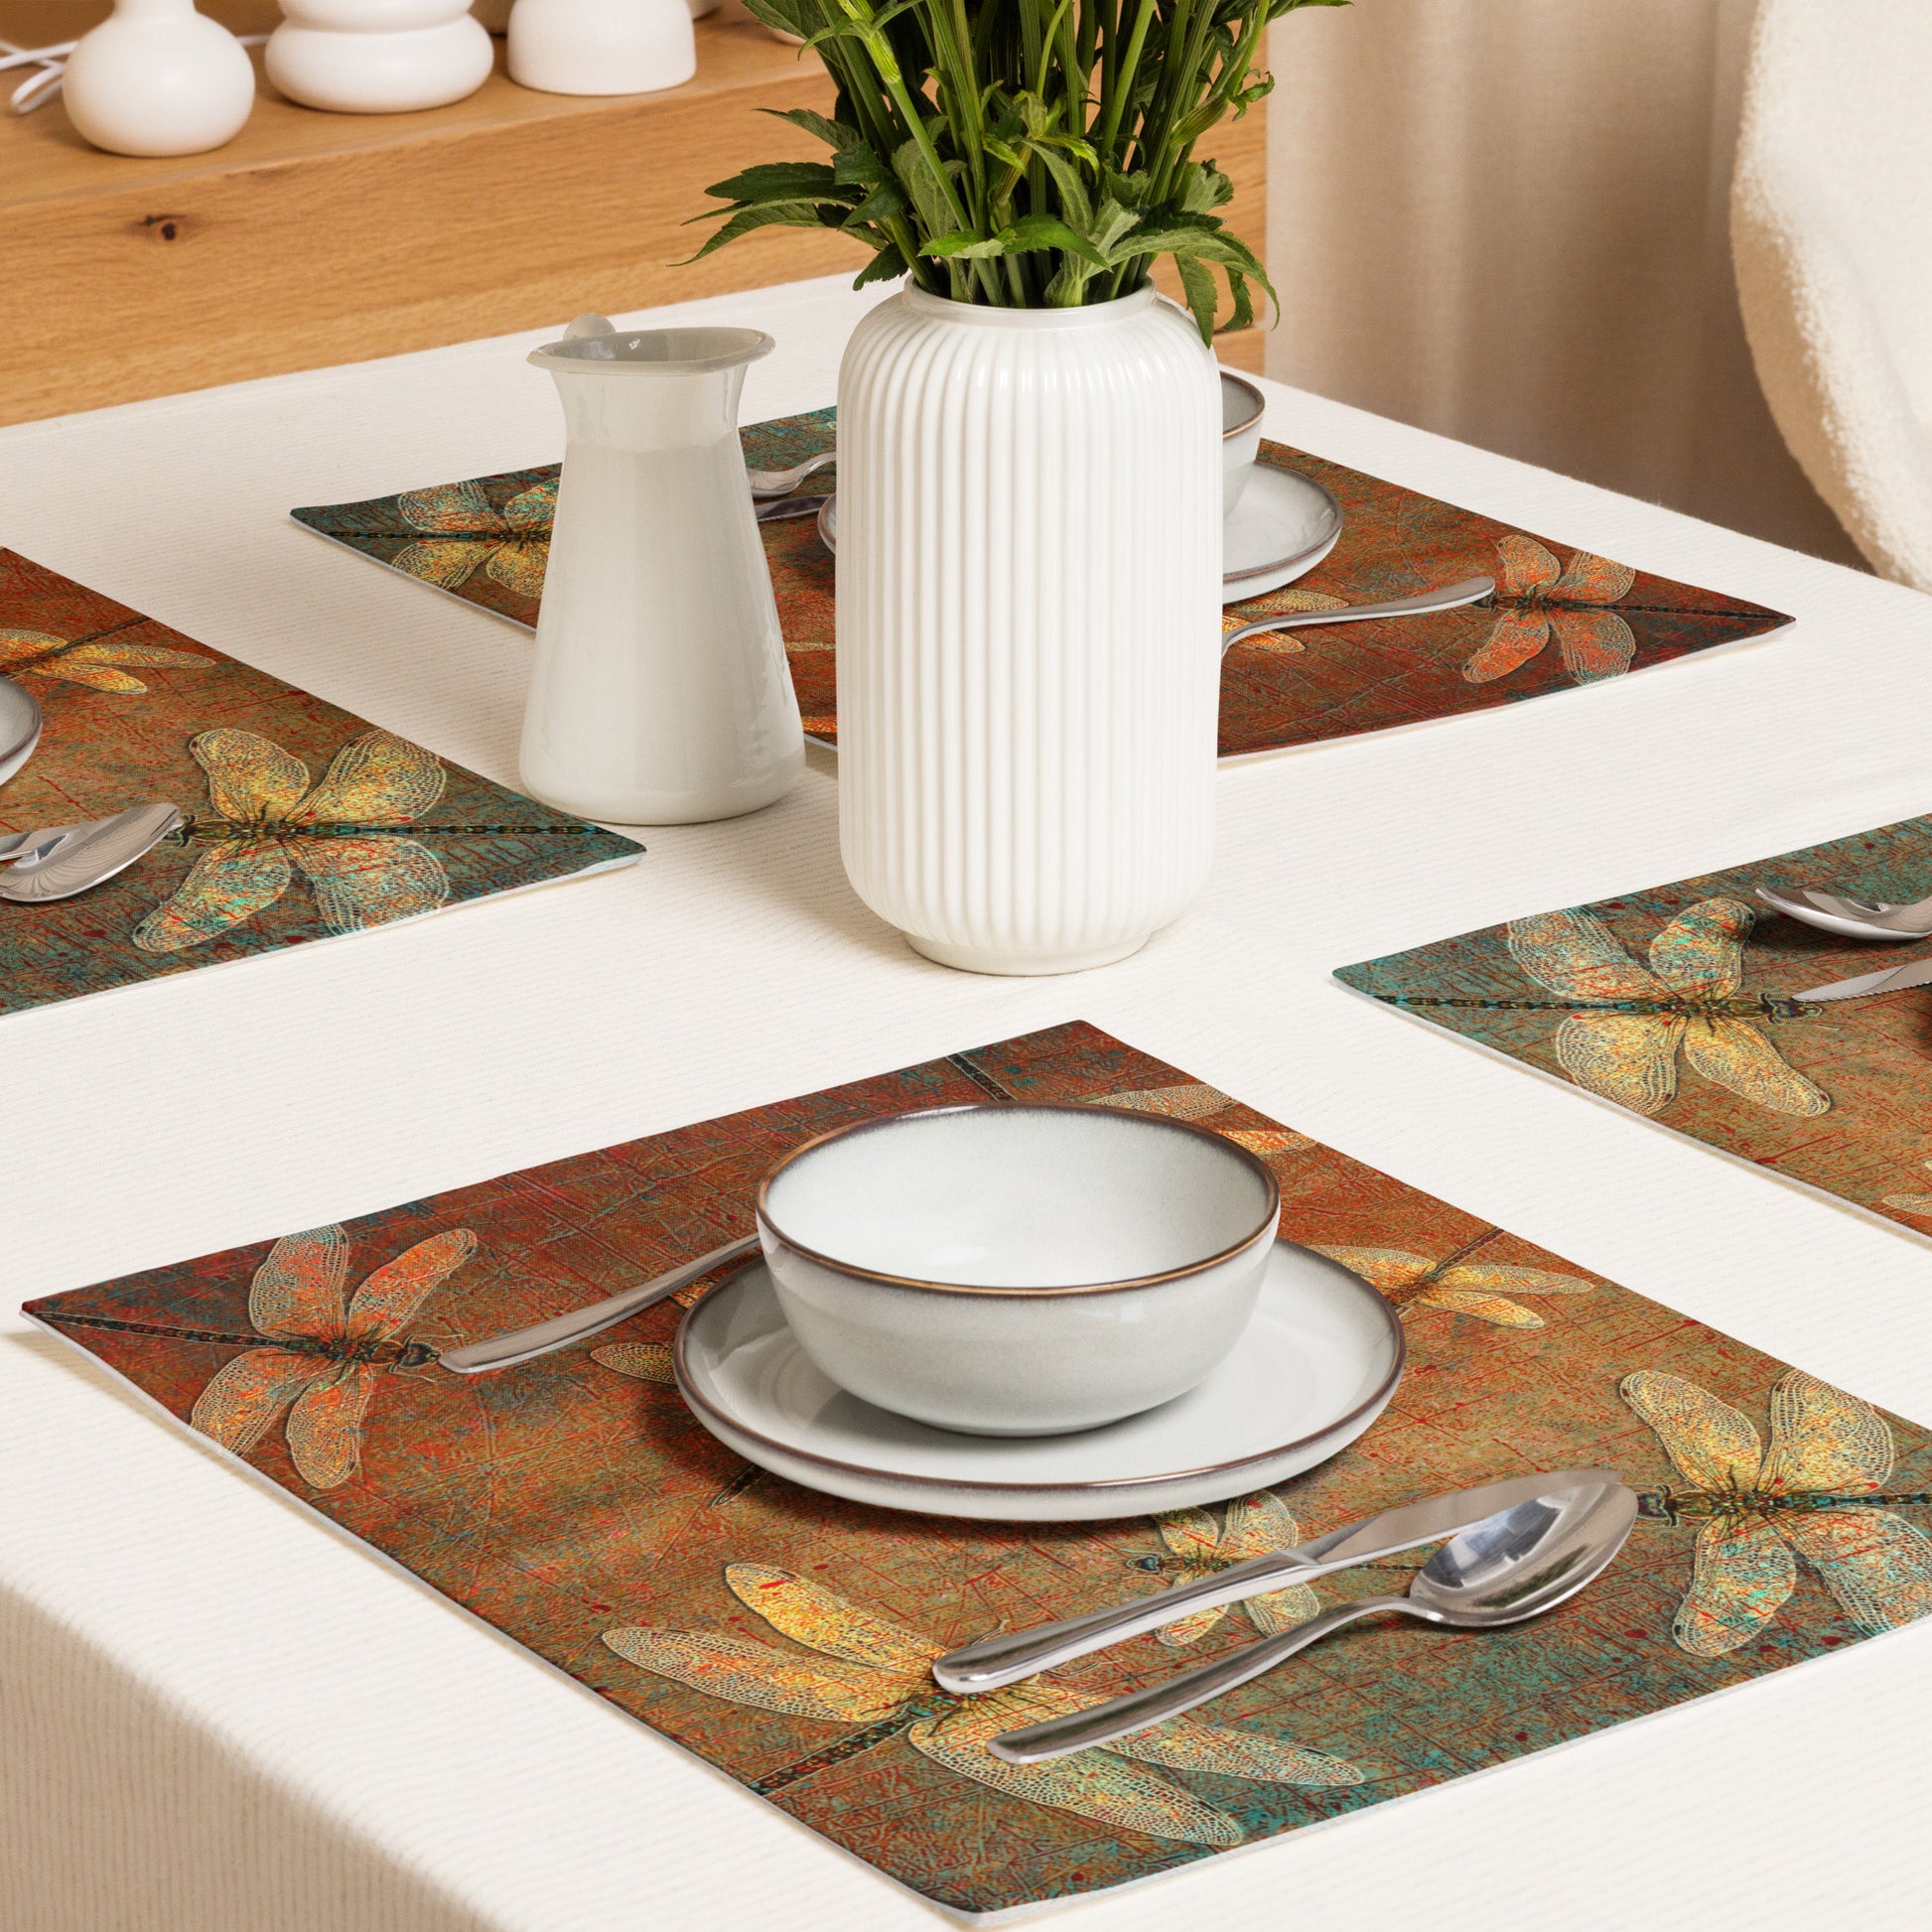 Golden Dragonflies on Orange and Green Background Print Placemat Set of 4 in situ